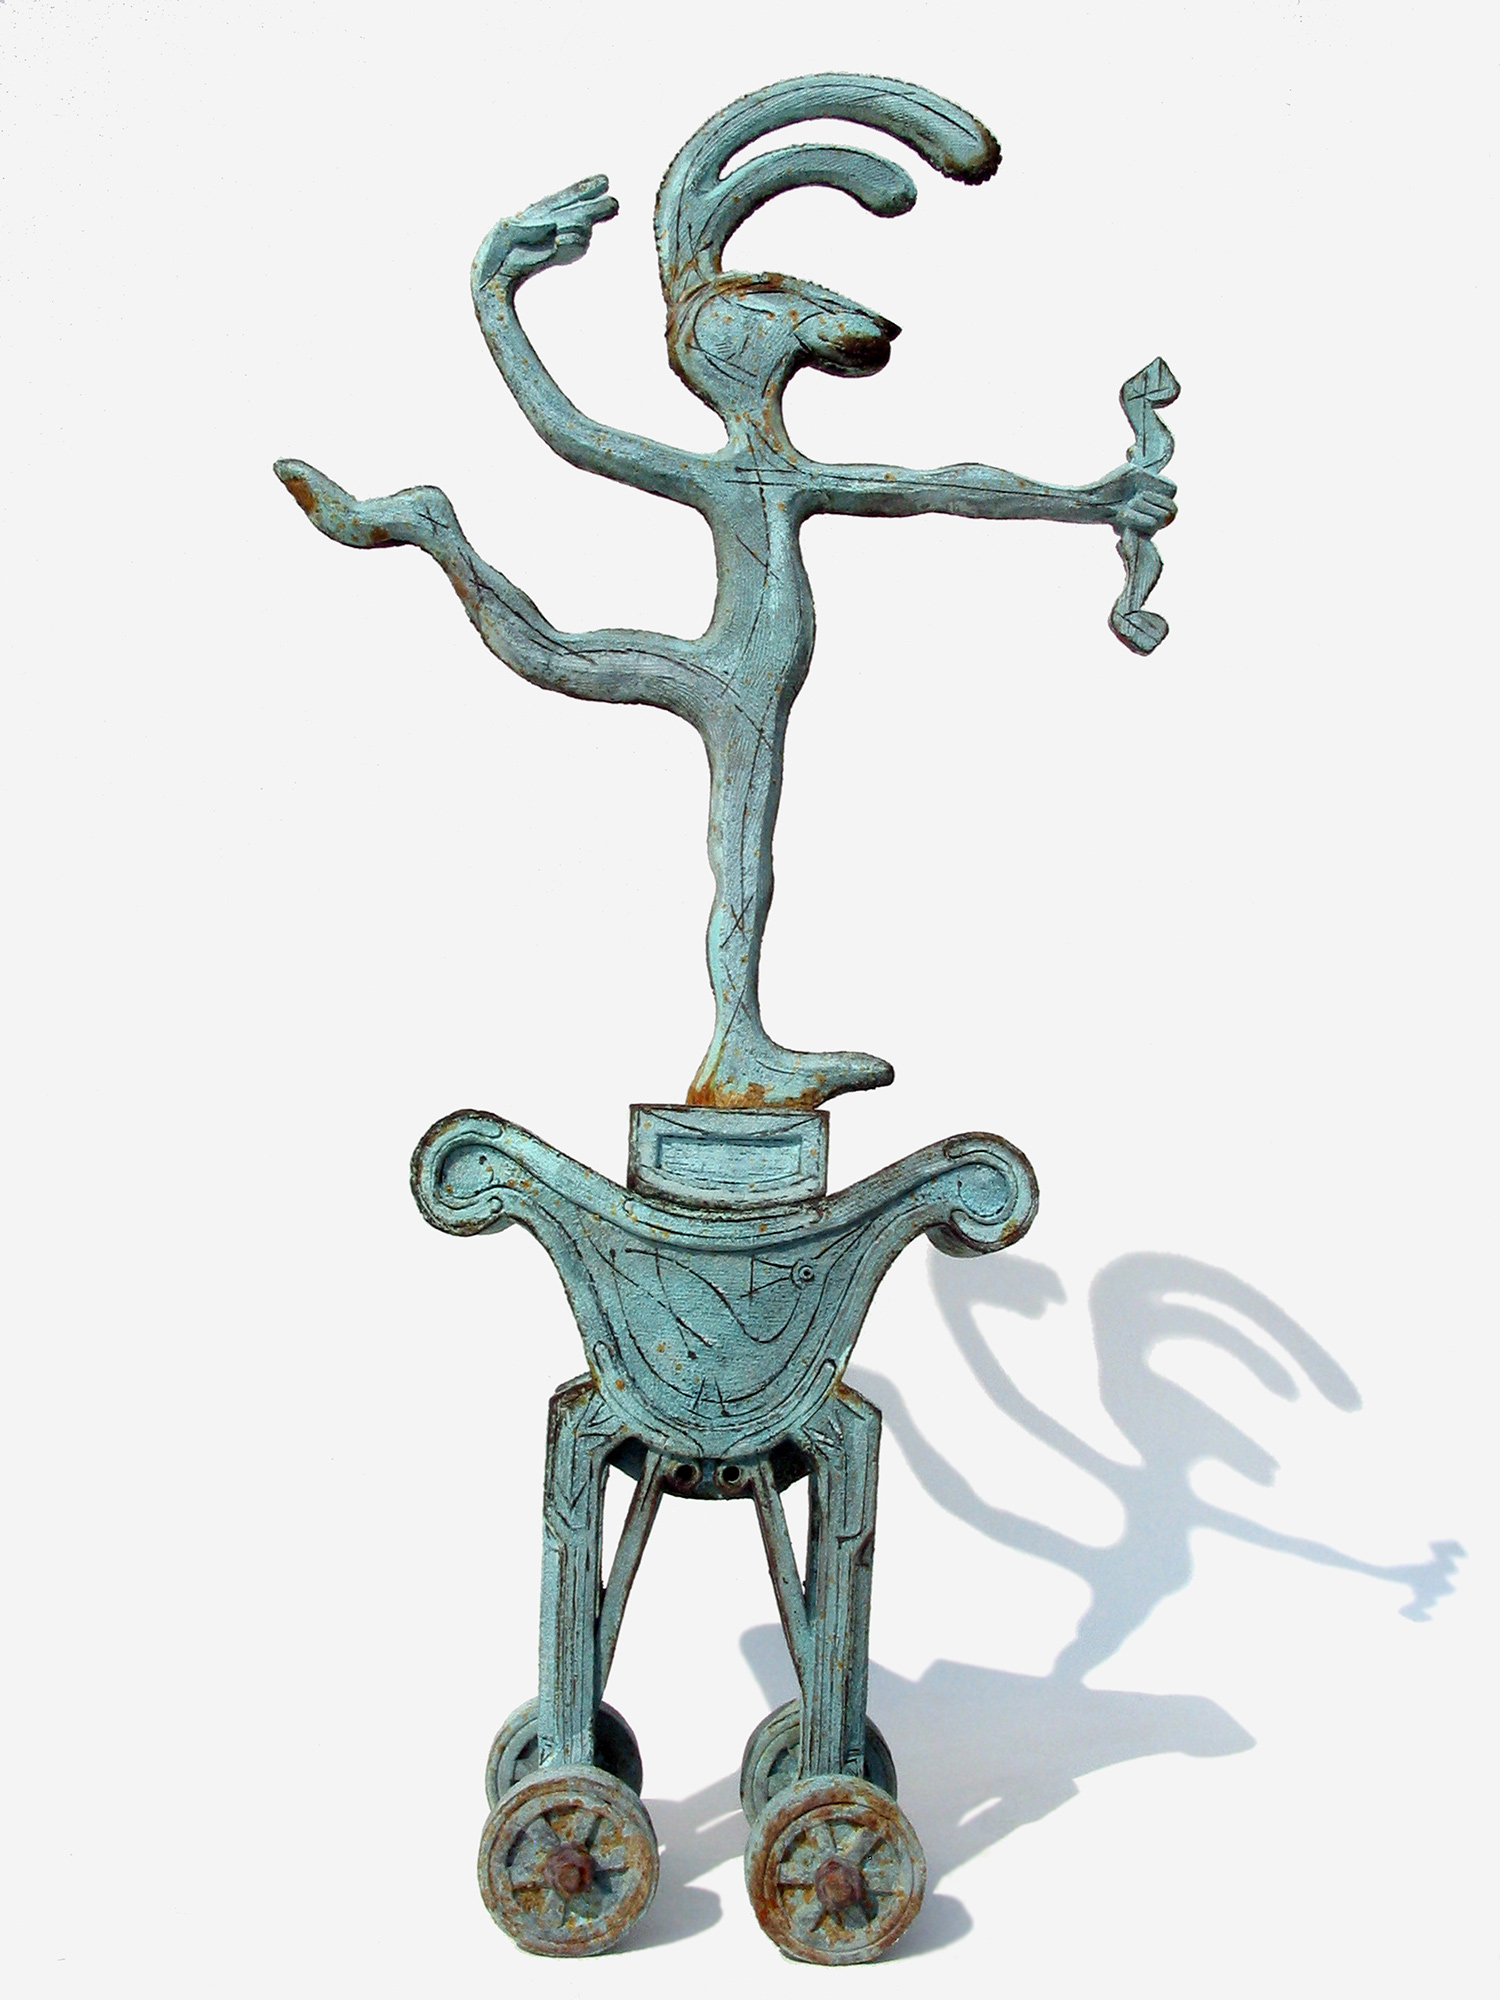  Panjandrum l &nbsp; ©&nbsp;  76 cm high x 39 cm wide  Unique  Two cartoon-like weather-vane hares “Pomp” and “Circumstance” take the guise of Eros the Archer on royal chariots.  This is no transportation fit for kings, but in the first image, a facs